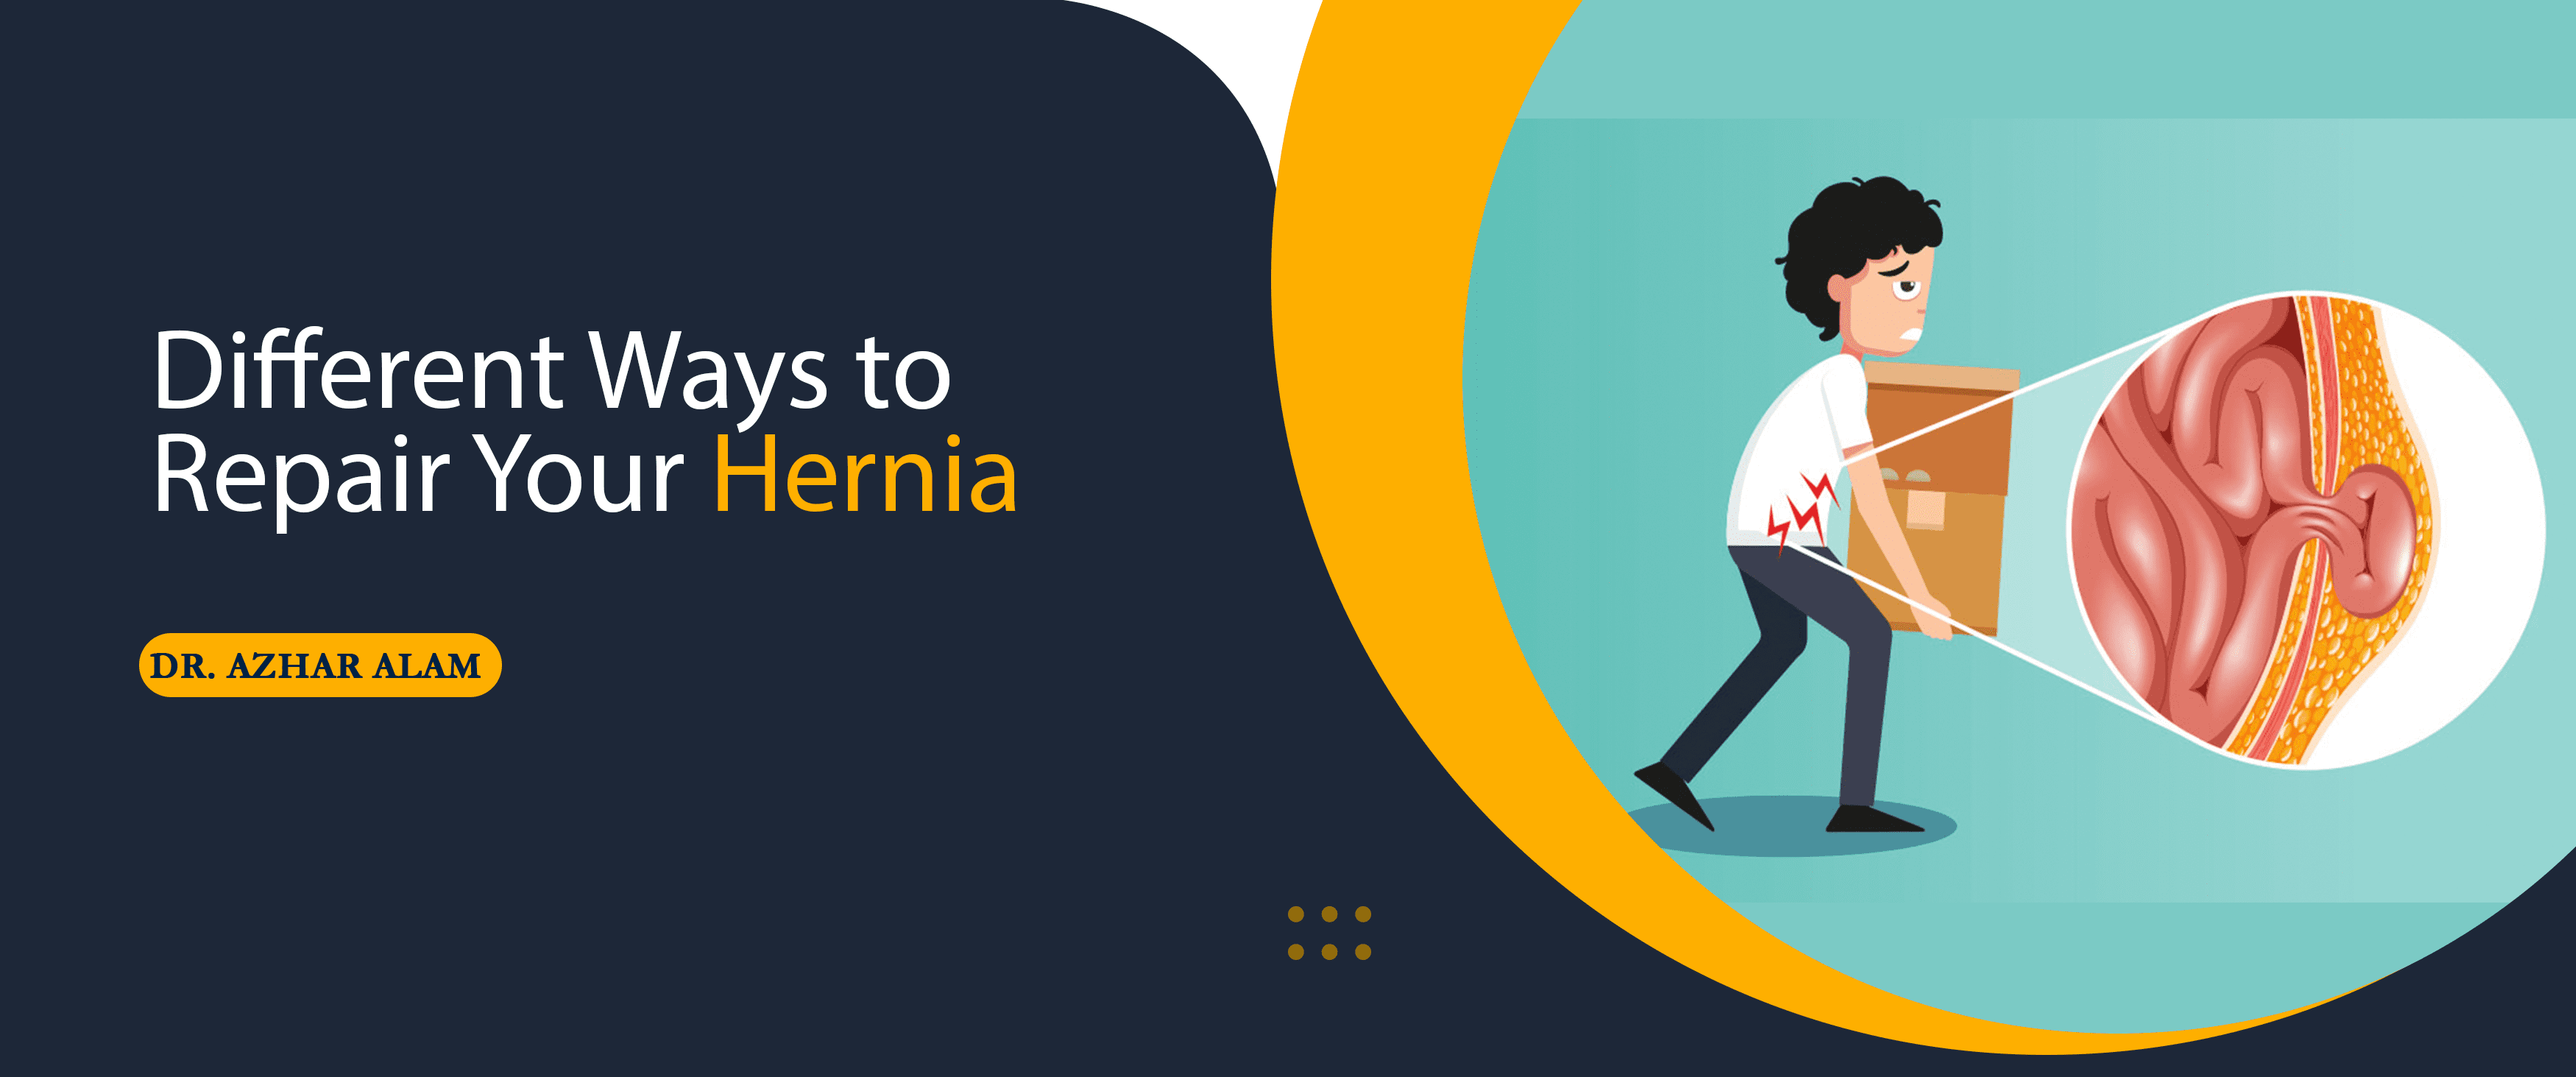 Different Ways to Repair Your Hernia